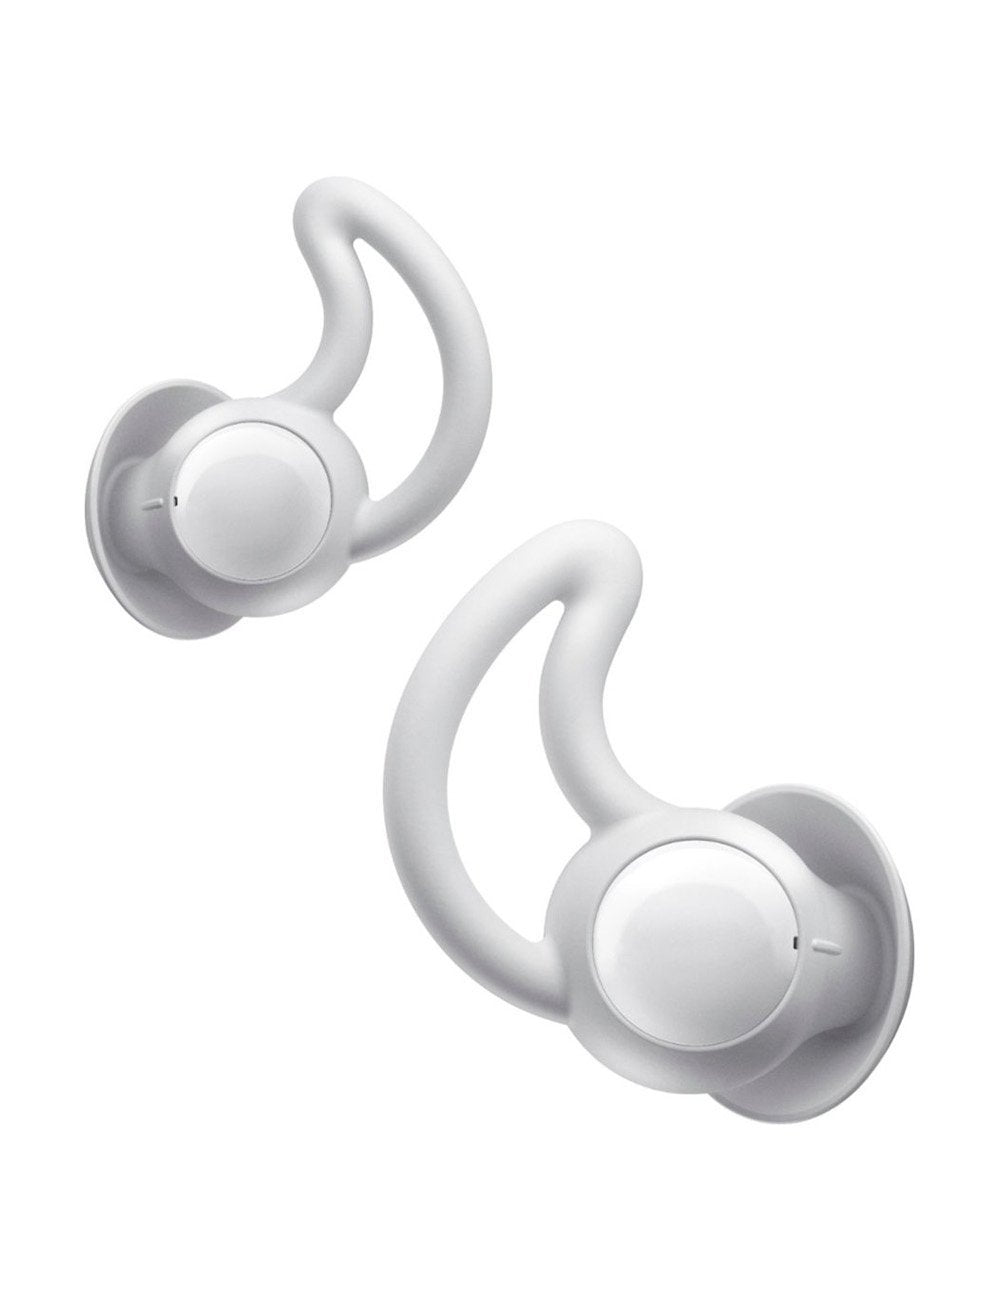 Hot Selling Twins Touch Earphone